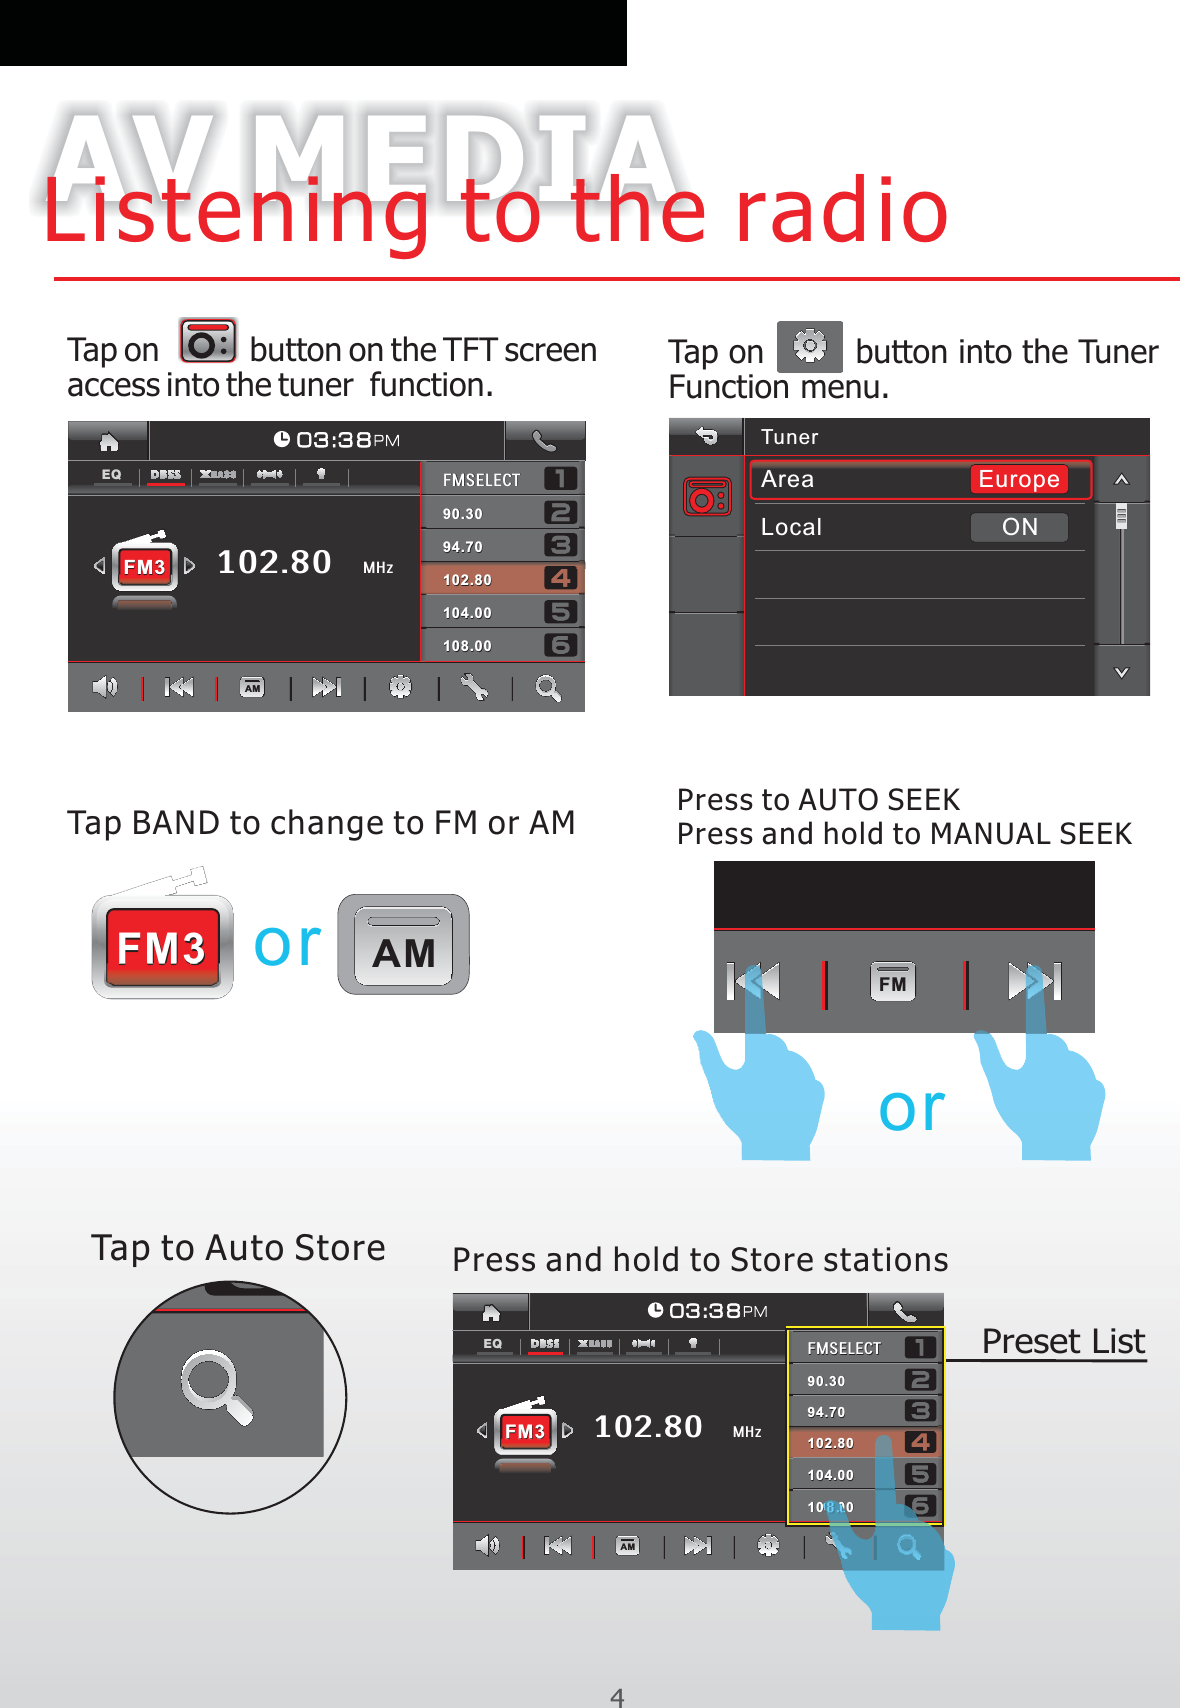 AV MEDIAListening to the radio4Tap BAND to change to FM or AMFM3FM3Tap on         button on the TFT screen access into the tuner  function. AMTunerLocalAreaONEuropeTap on         button into the Tuner Function menu.FMoror102.80FMSELECTFMSELECT90.3090.30108.00108.00102.80102.80104.00104.0094.7094.70FM3FM3 MHz0 3 :3 8AMEQPress and hold to MANUAL SEEK102.80FMSELECTFMSELECT90.3090.30108.00108.00102.80102.80104.00104.0094.7094.70FM3FM3MHz0 3 :3 8AMEQPreset ListPress to AUTO SEEKTap to Auto Store Press and hold to Store stations 